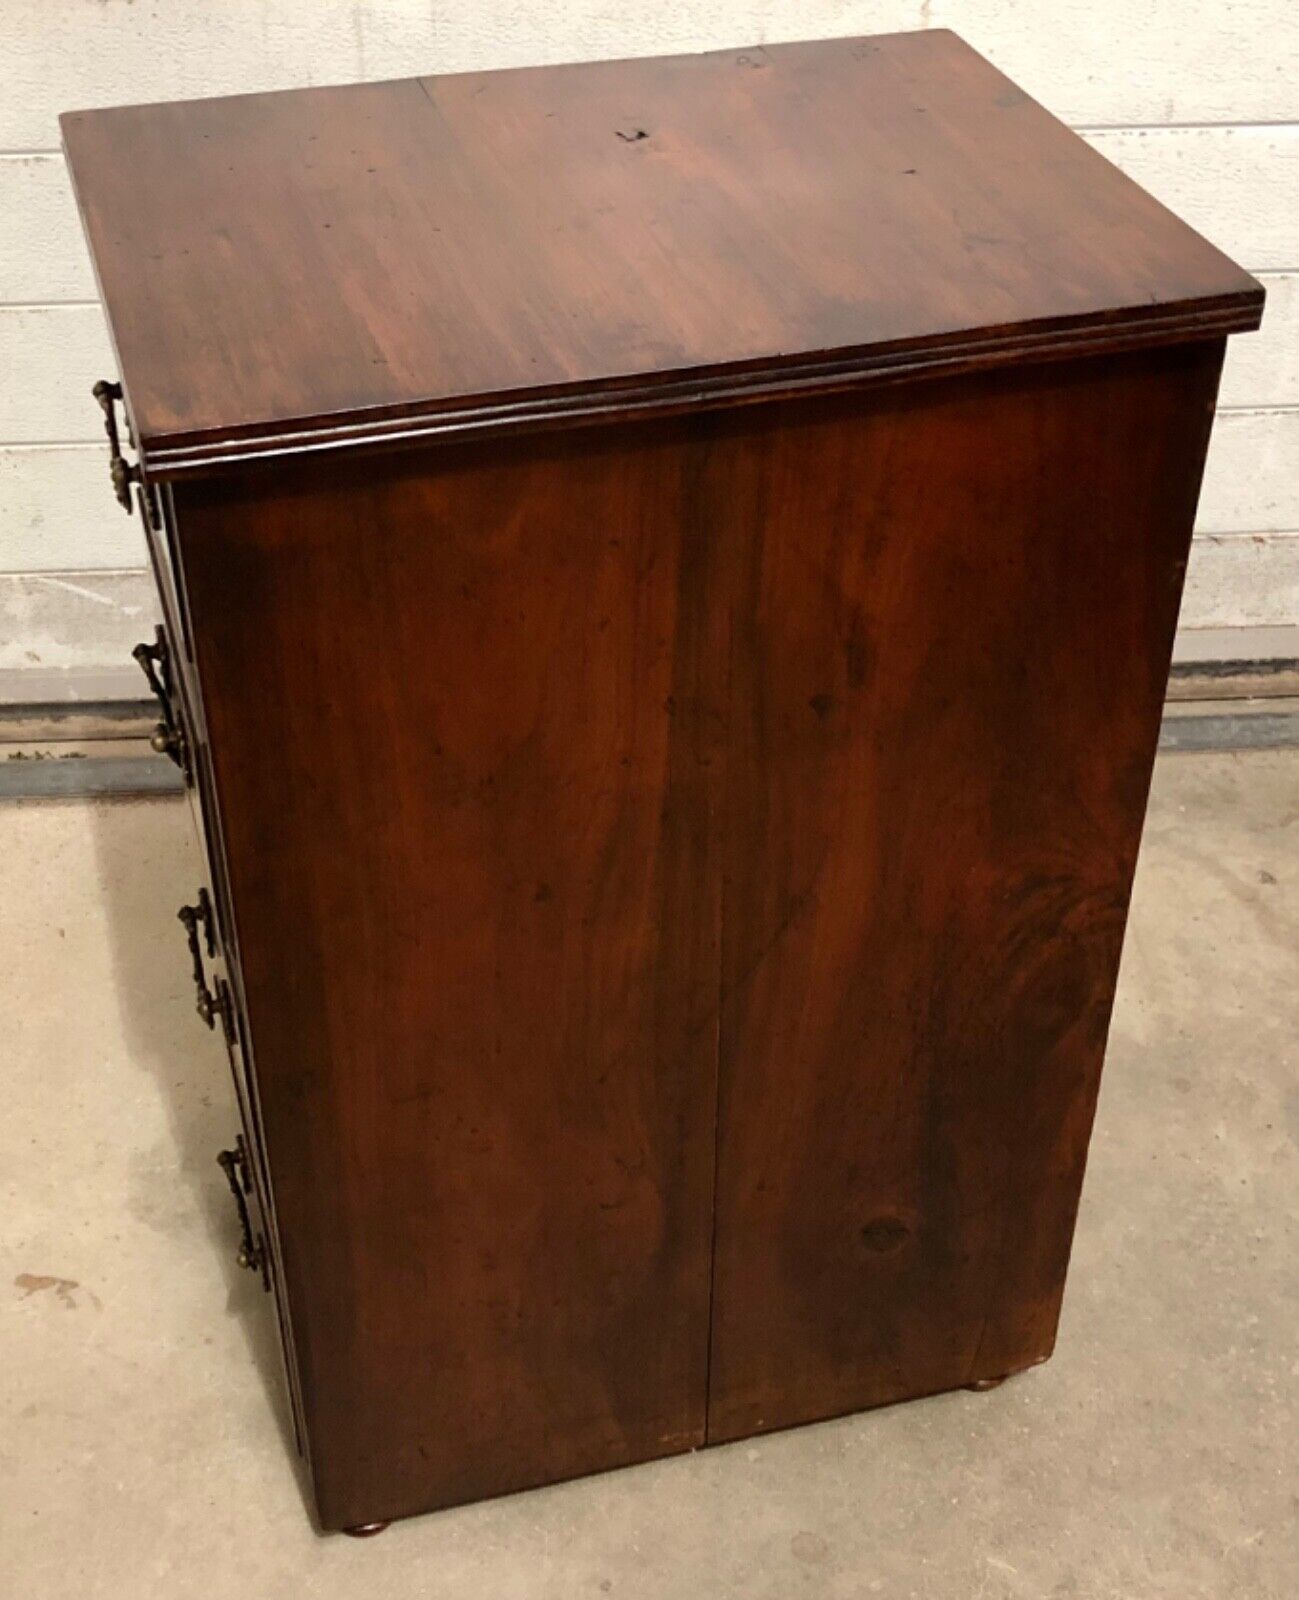 000821.....Handsome Antique Walnut Bedside Chest / Small Chest Of Drawers